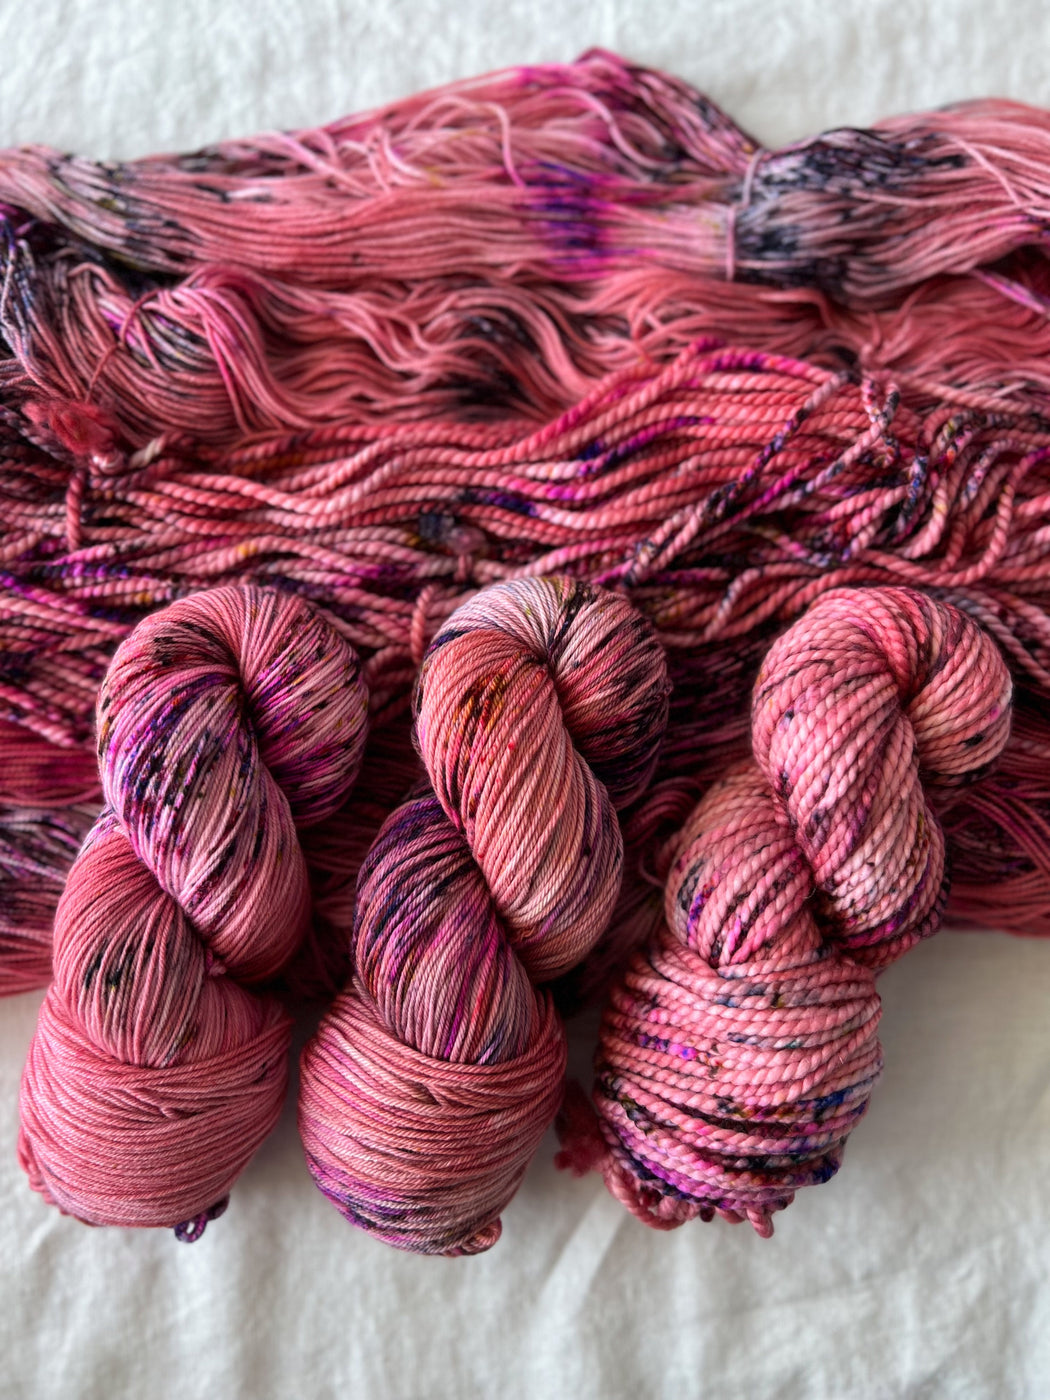 Pombaline - Ruby and Roses Yarn - Hand Dyed Yarn